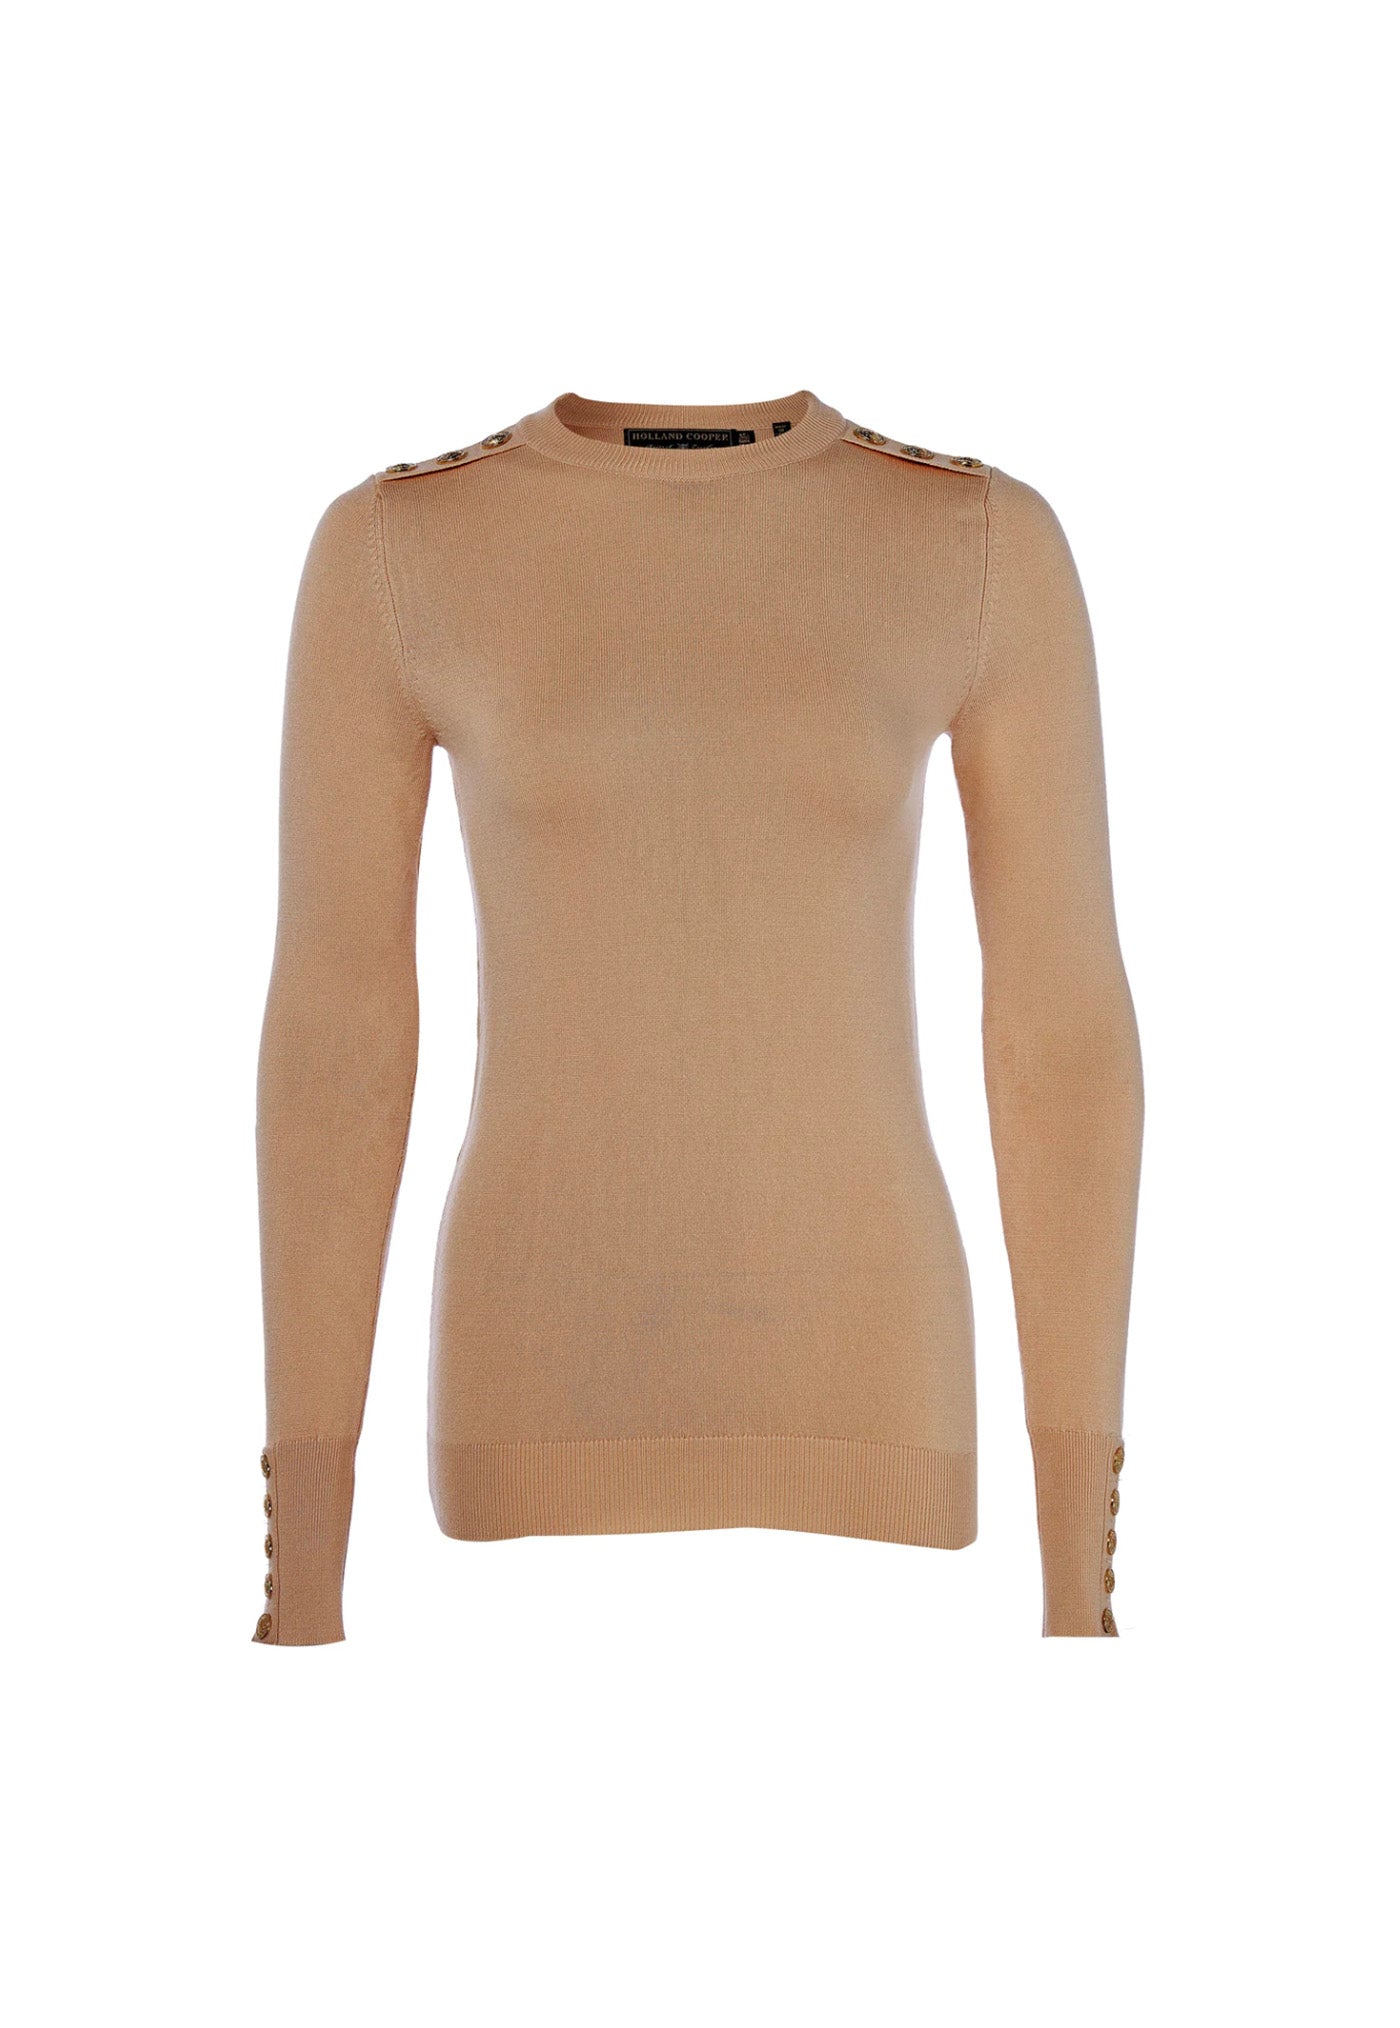 Buttoned Knit Crew Neck - Dark Camel sold by Angel Divine